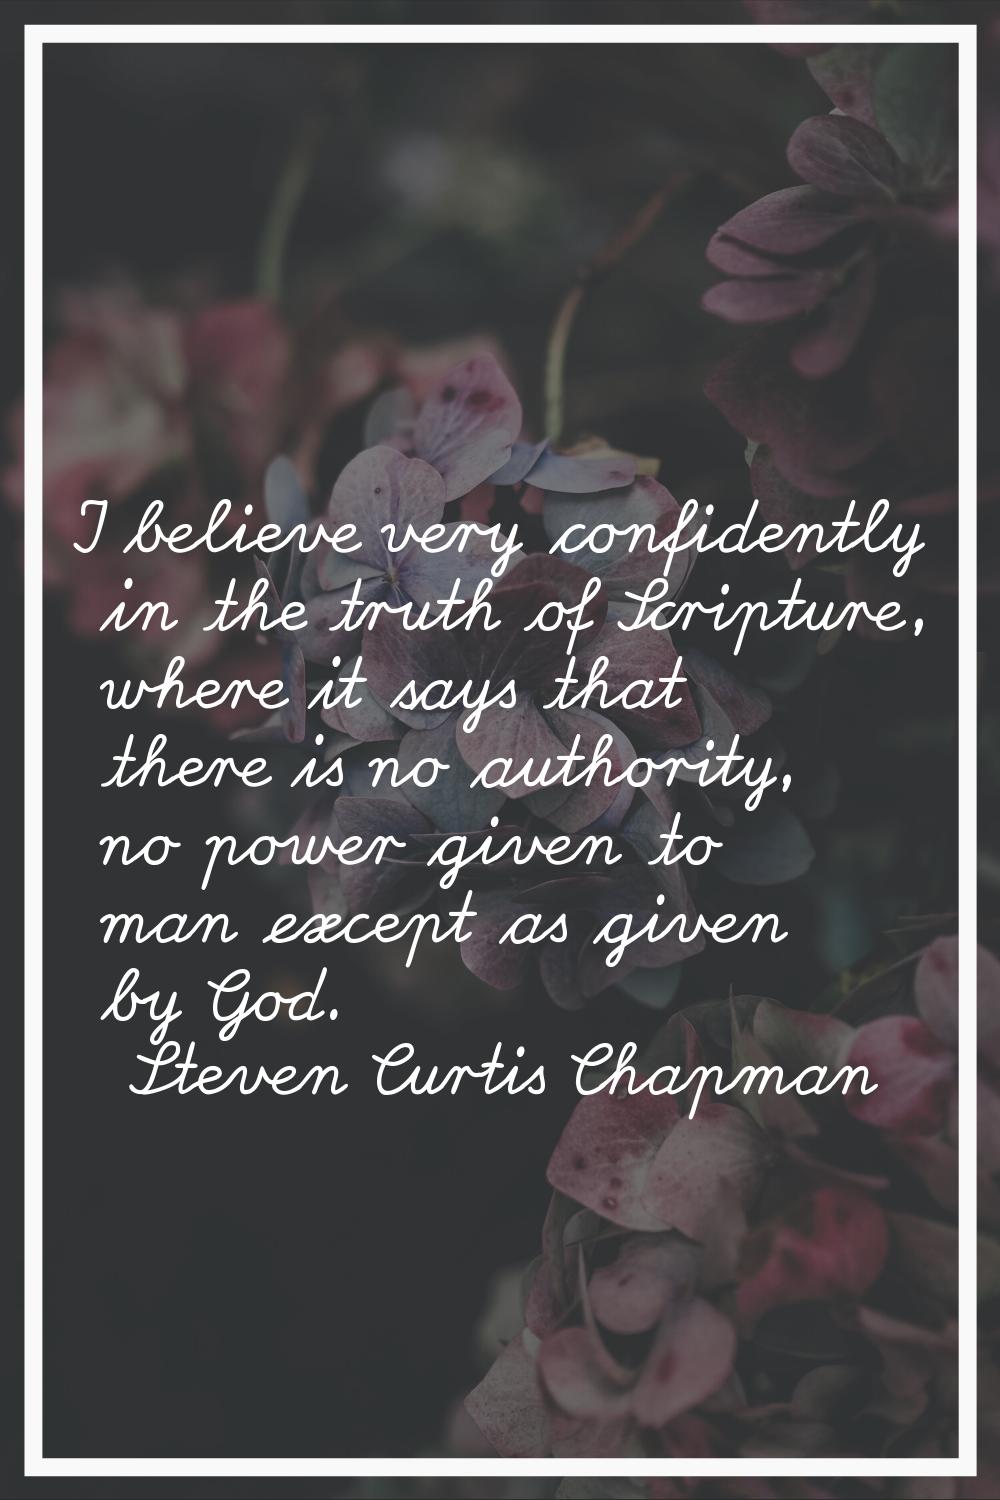 I believe very confidently in the truth of Scripture, where it says that there is no authority, no 